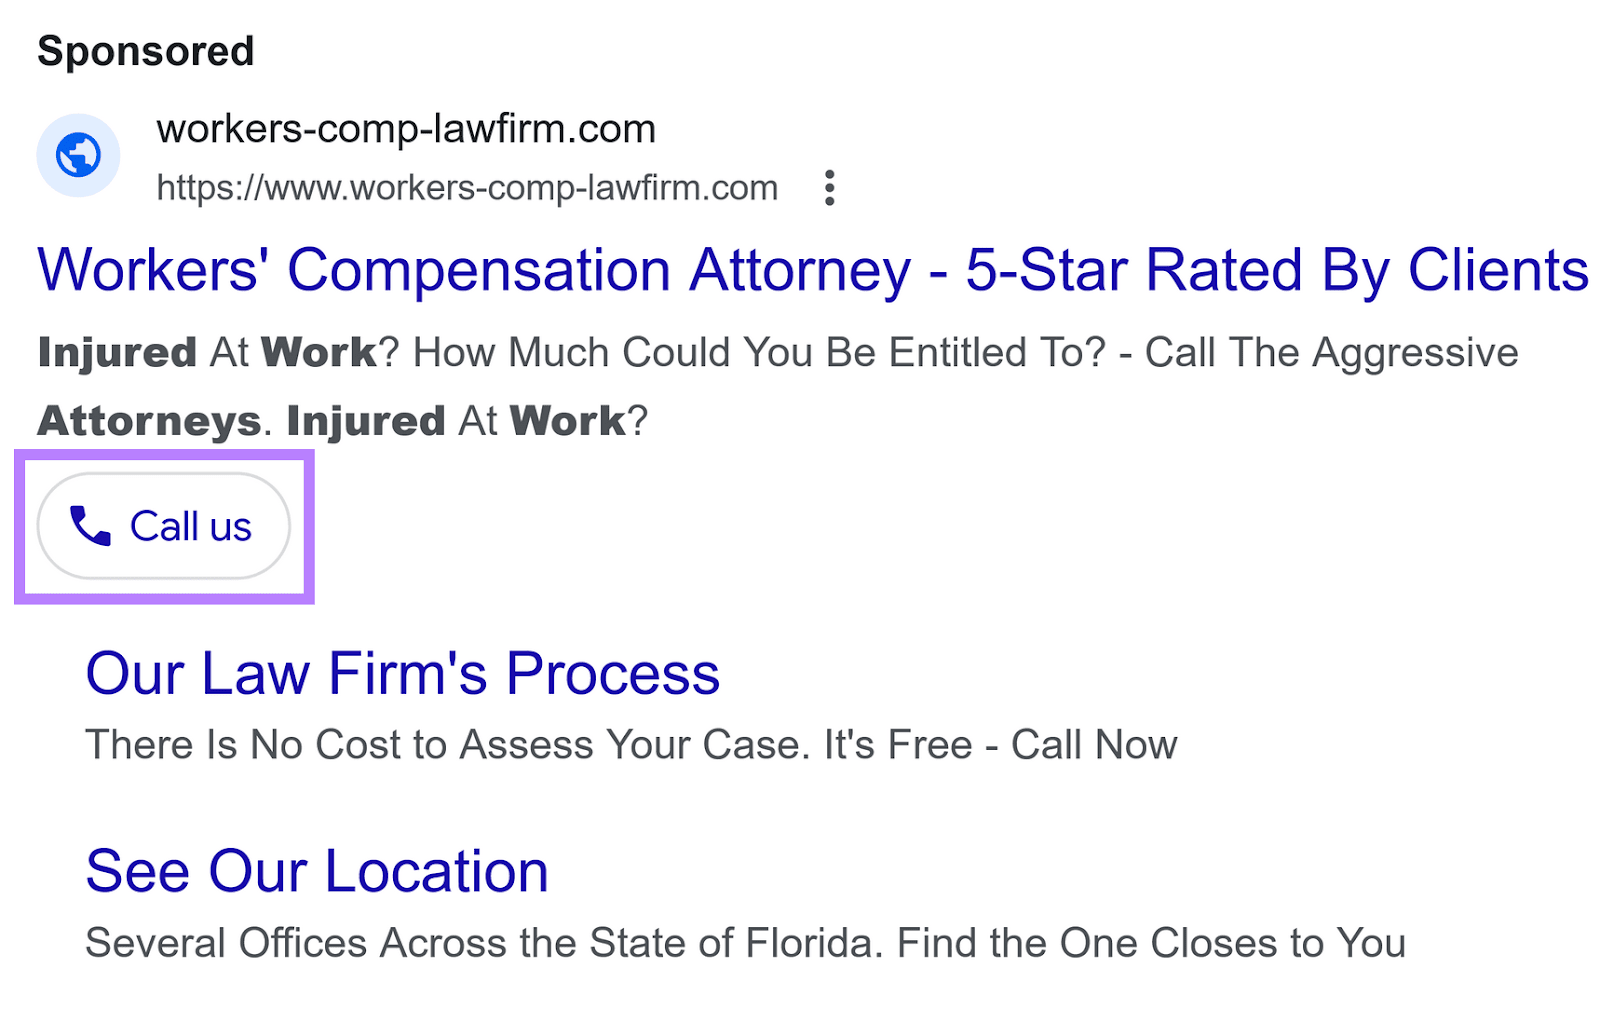 An ad on Google SERP with a "Call us" button link displayed